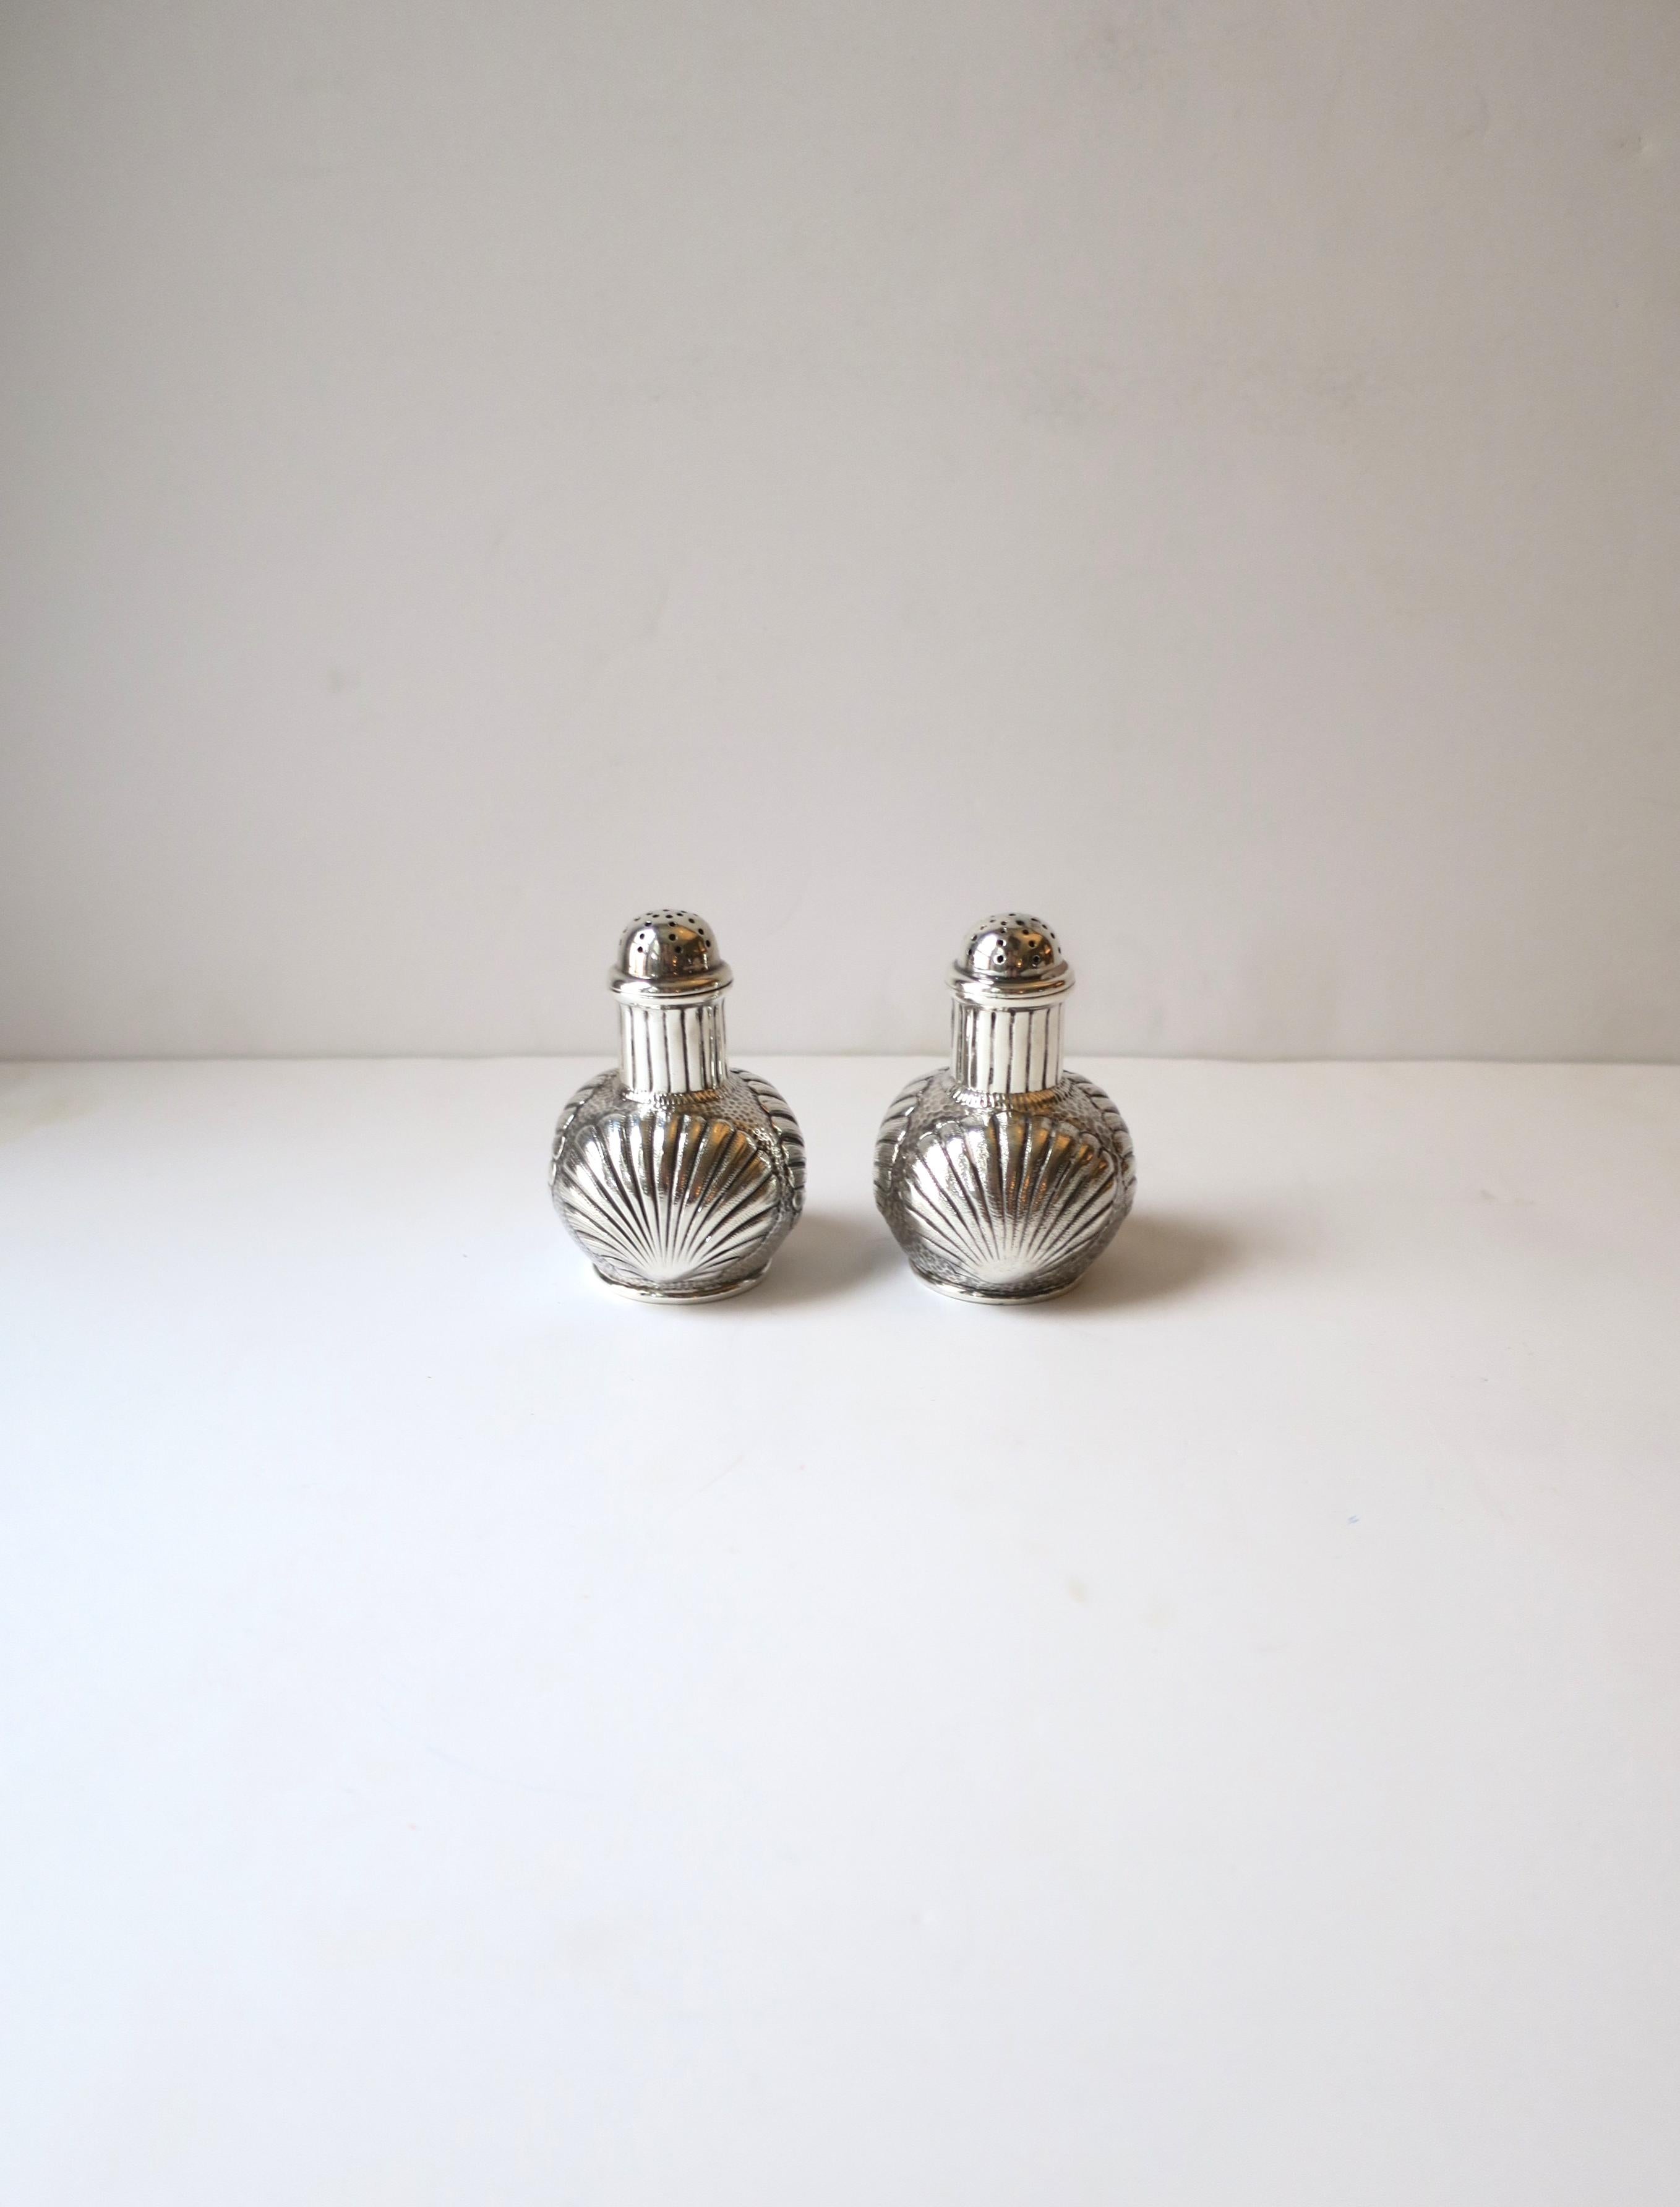 American Sterling Silver Salt & Pepper Shakers Scallop Seashell Design by Caldwell, Pair For Sale